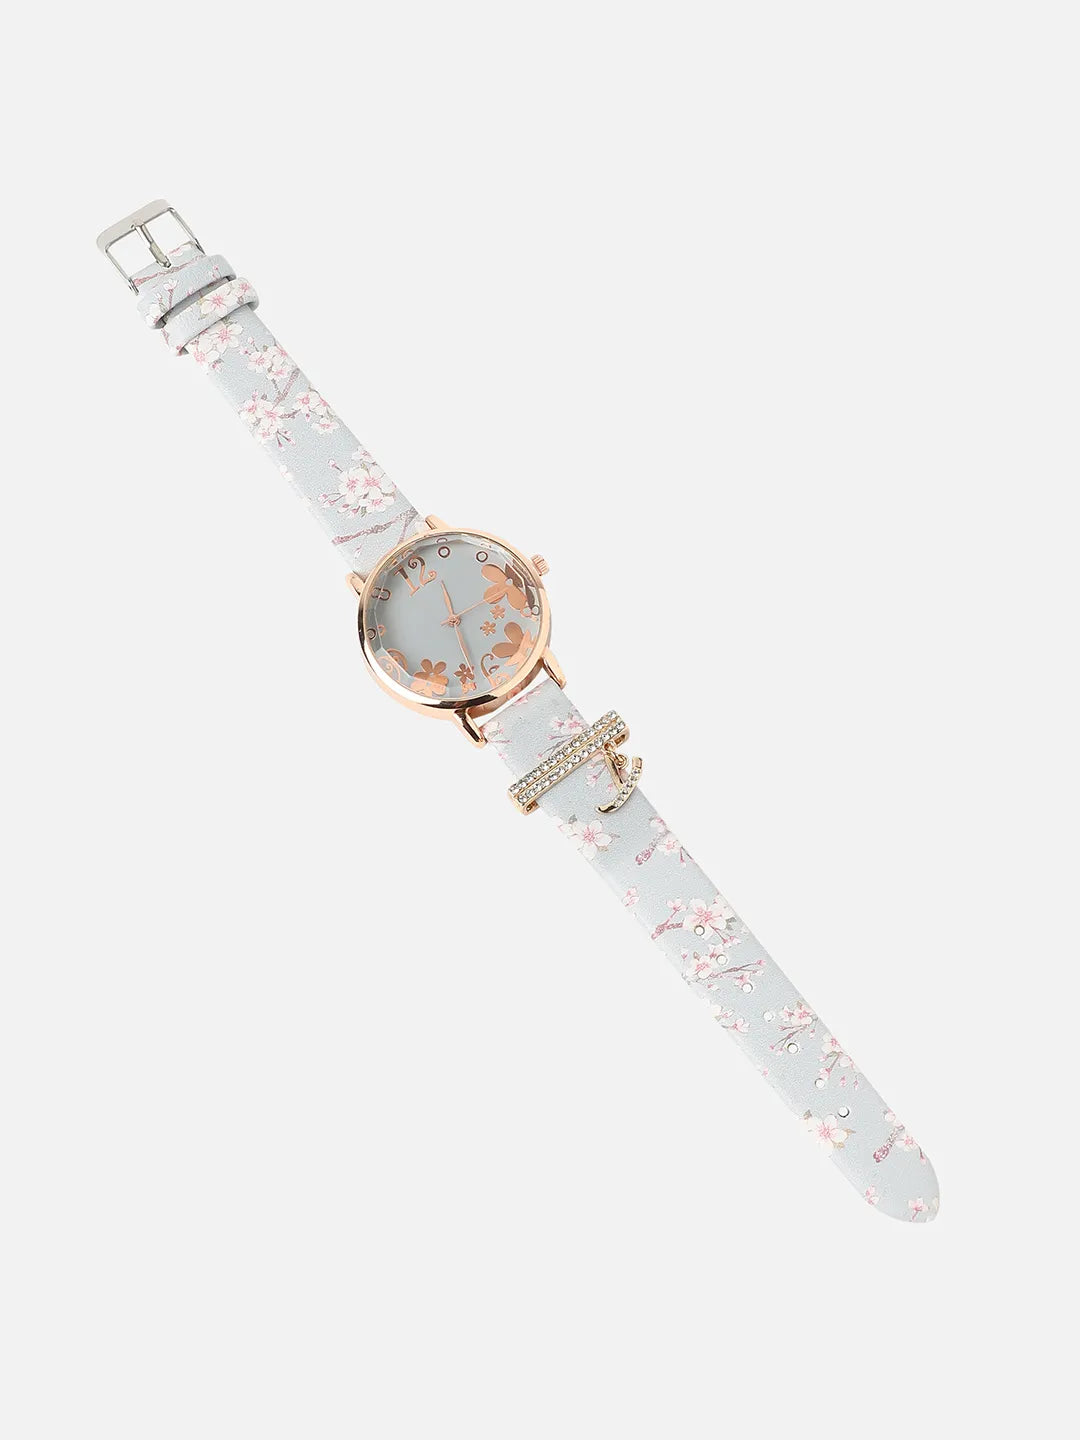 Round Analog Watch With Embellished Hearts Watch Charm - Grey